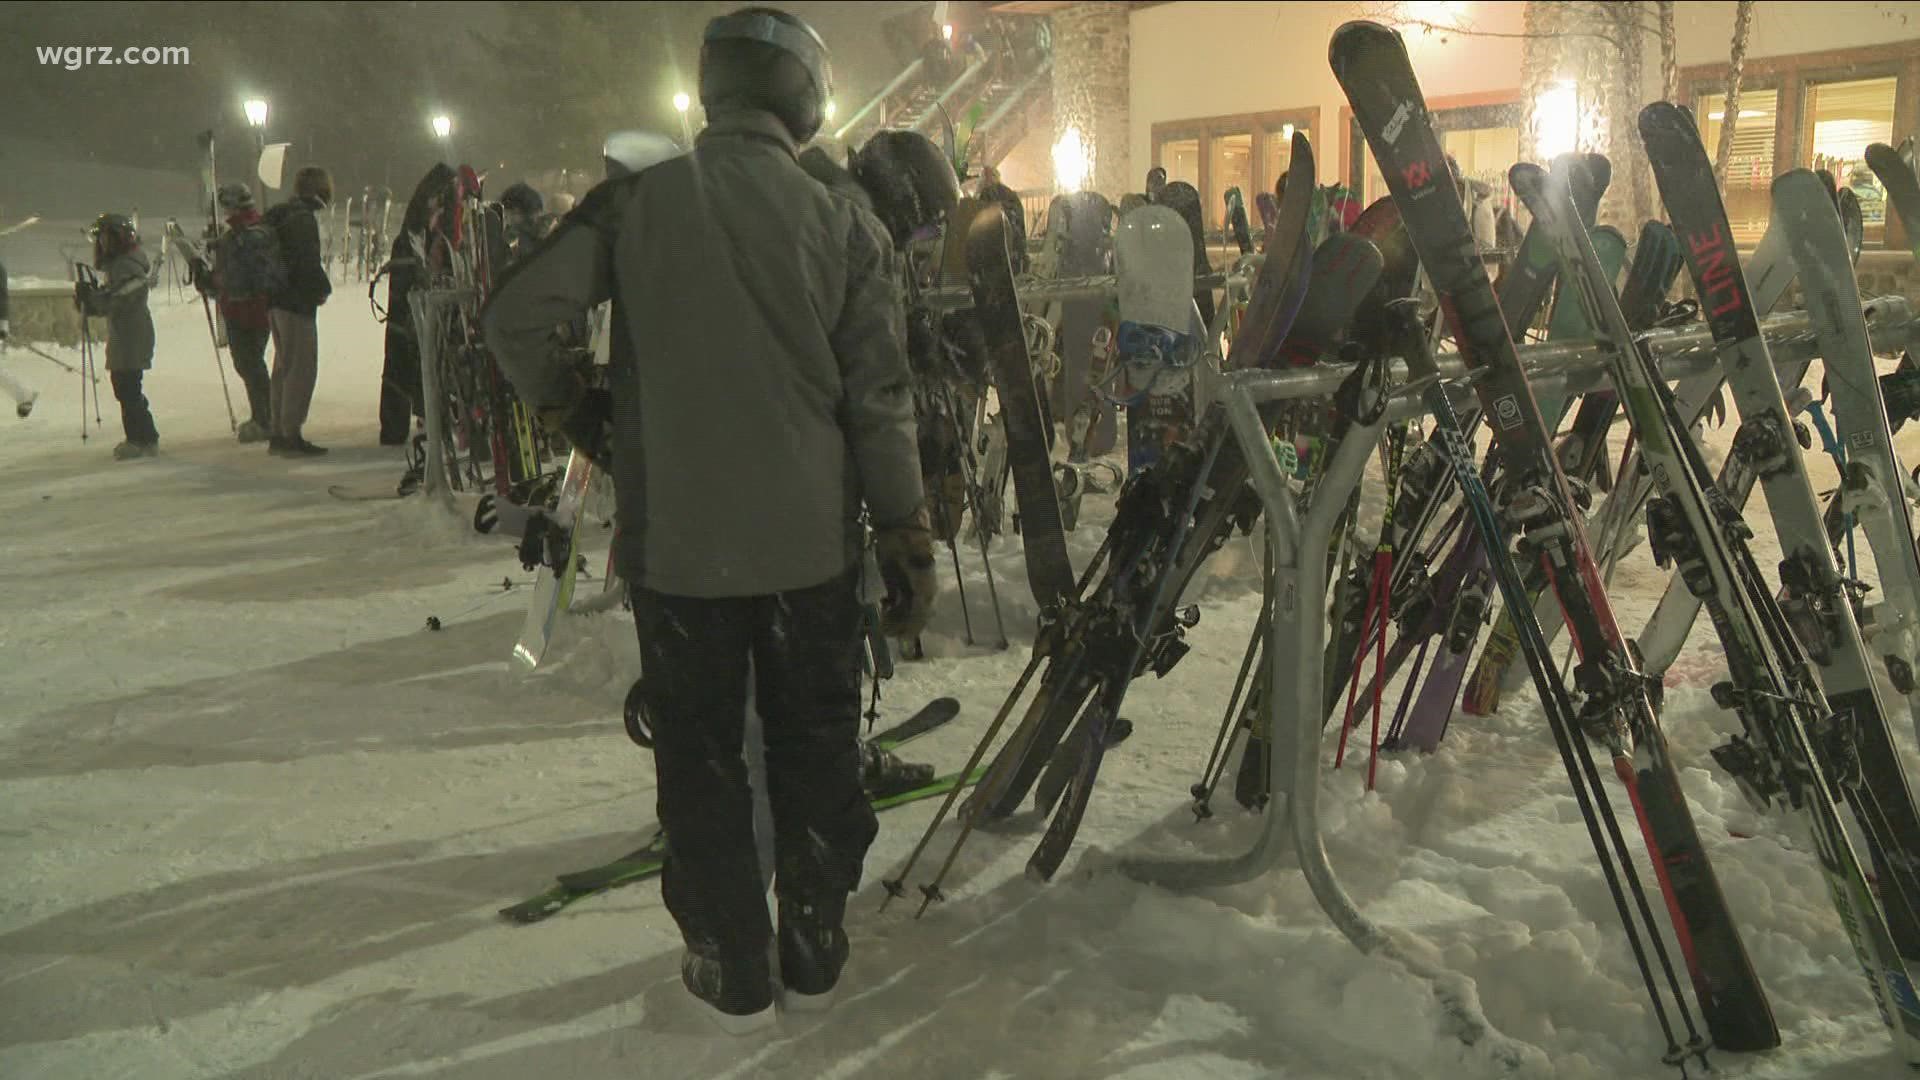 Holiday Valley was packed with people ready to hit the slopes Friday night. Although Holiday had a slow start to the season, they say the remainder looks promising.